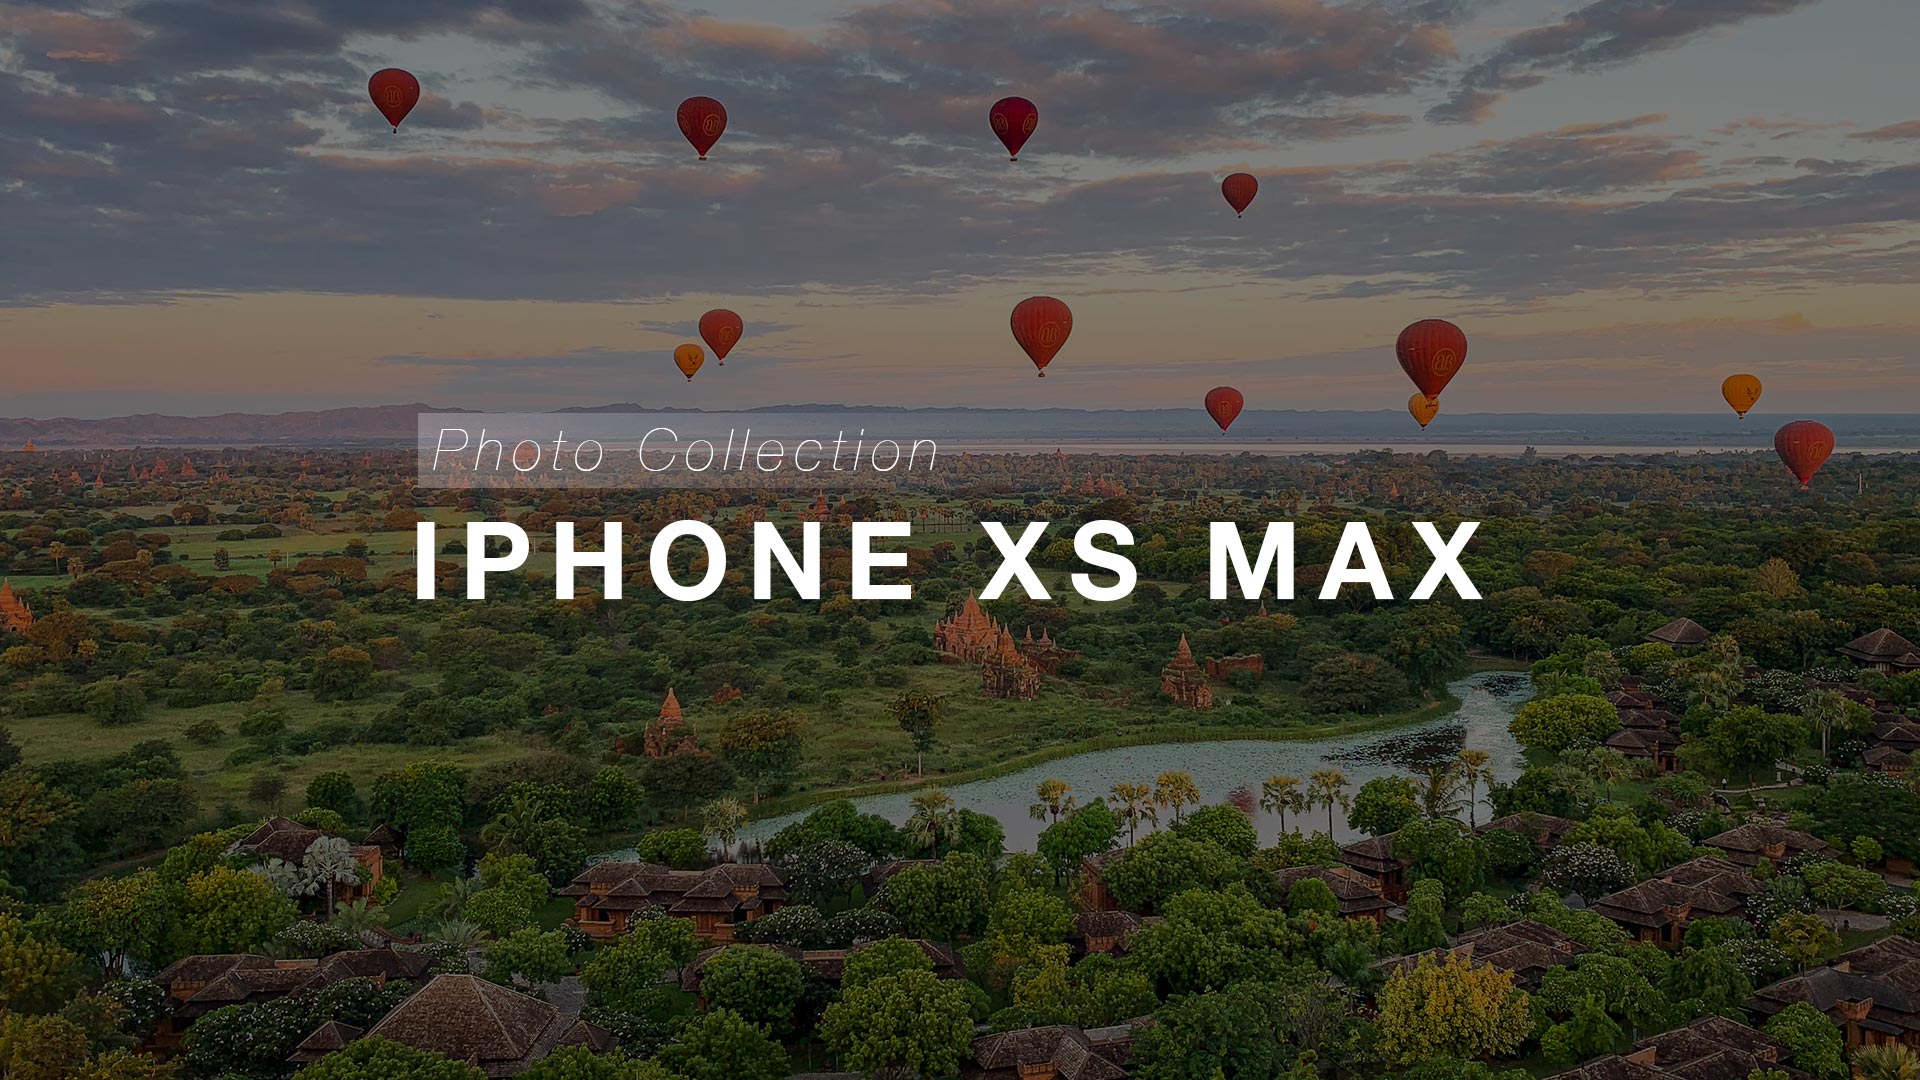 iPhone XS Max – Photography Collection